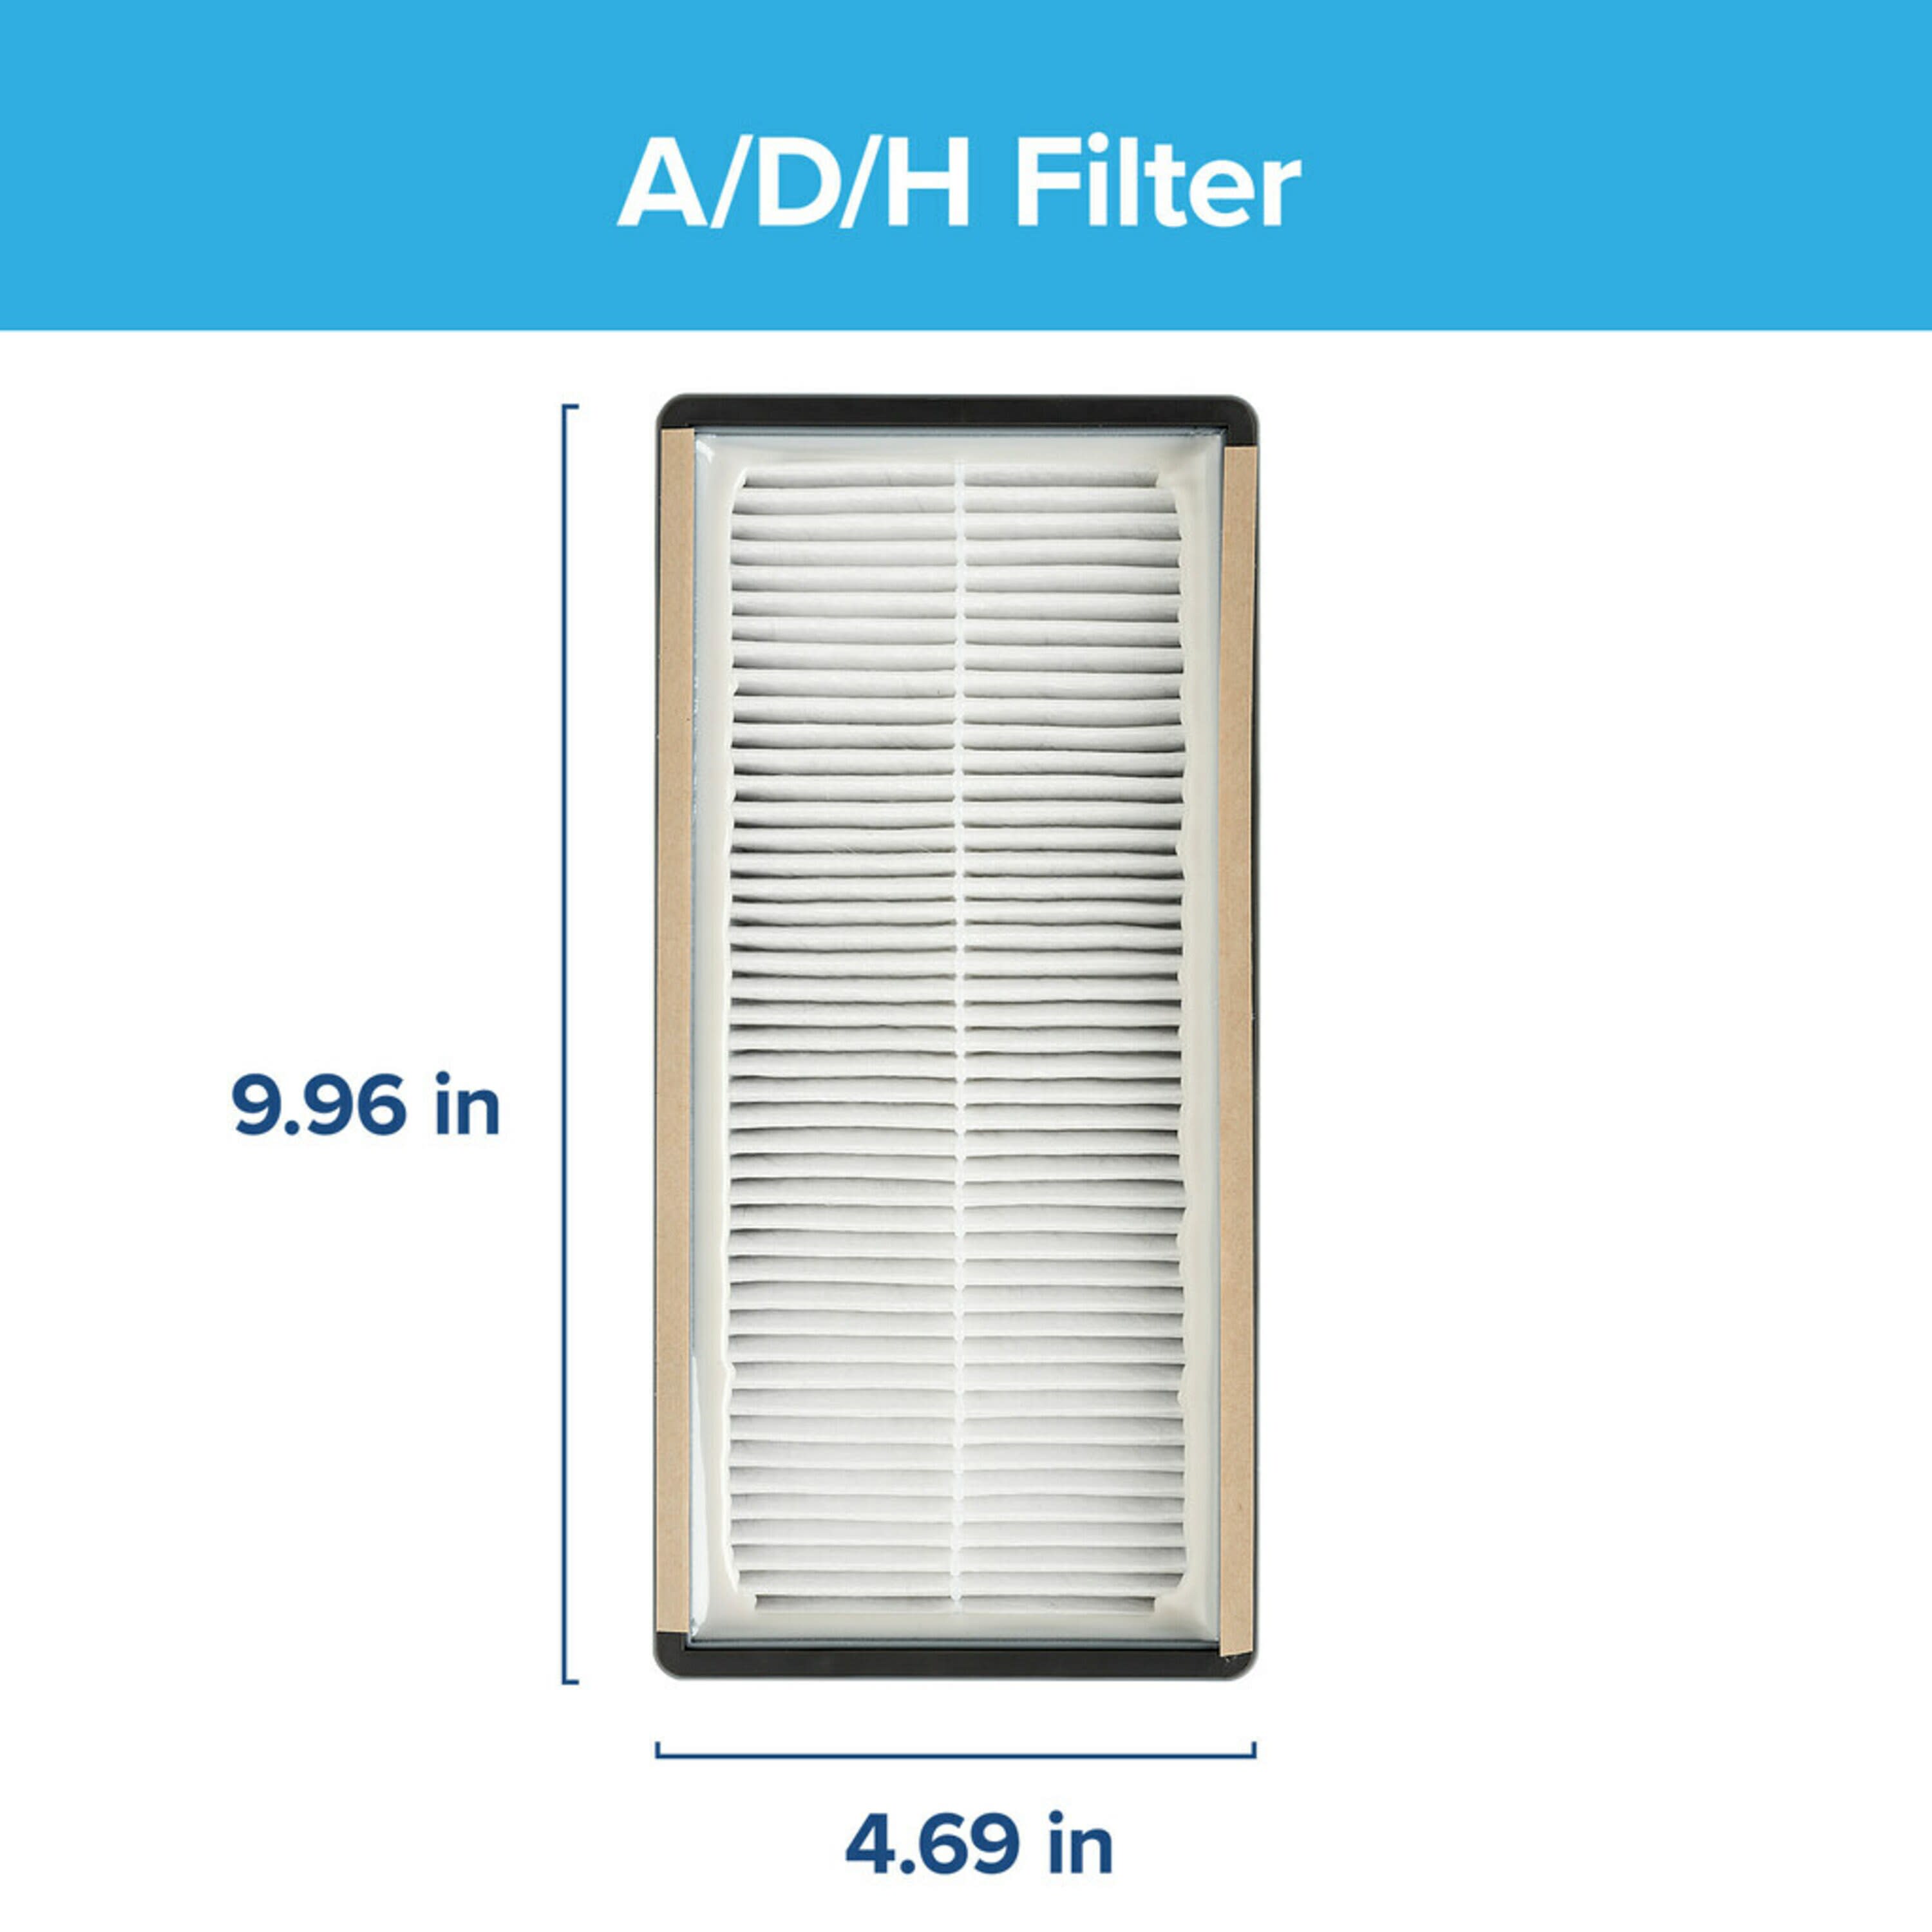 Filtrete by 3M Allergen Reduction + Odor Reduction Air Purifier Filter, Replaces Sizse A/D/H Filters, 2 Pack - image 3 of 12